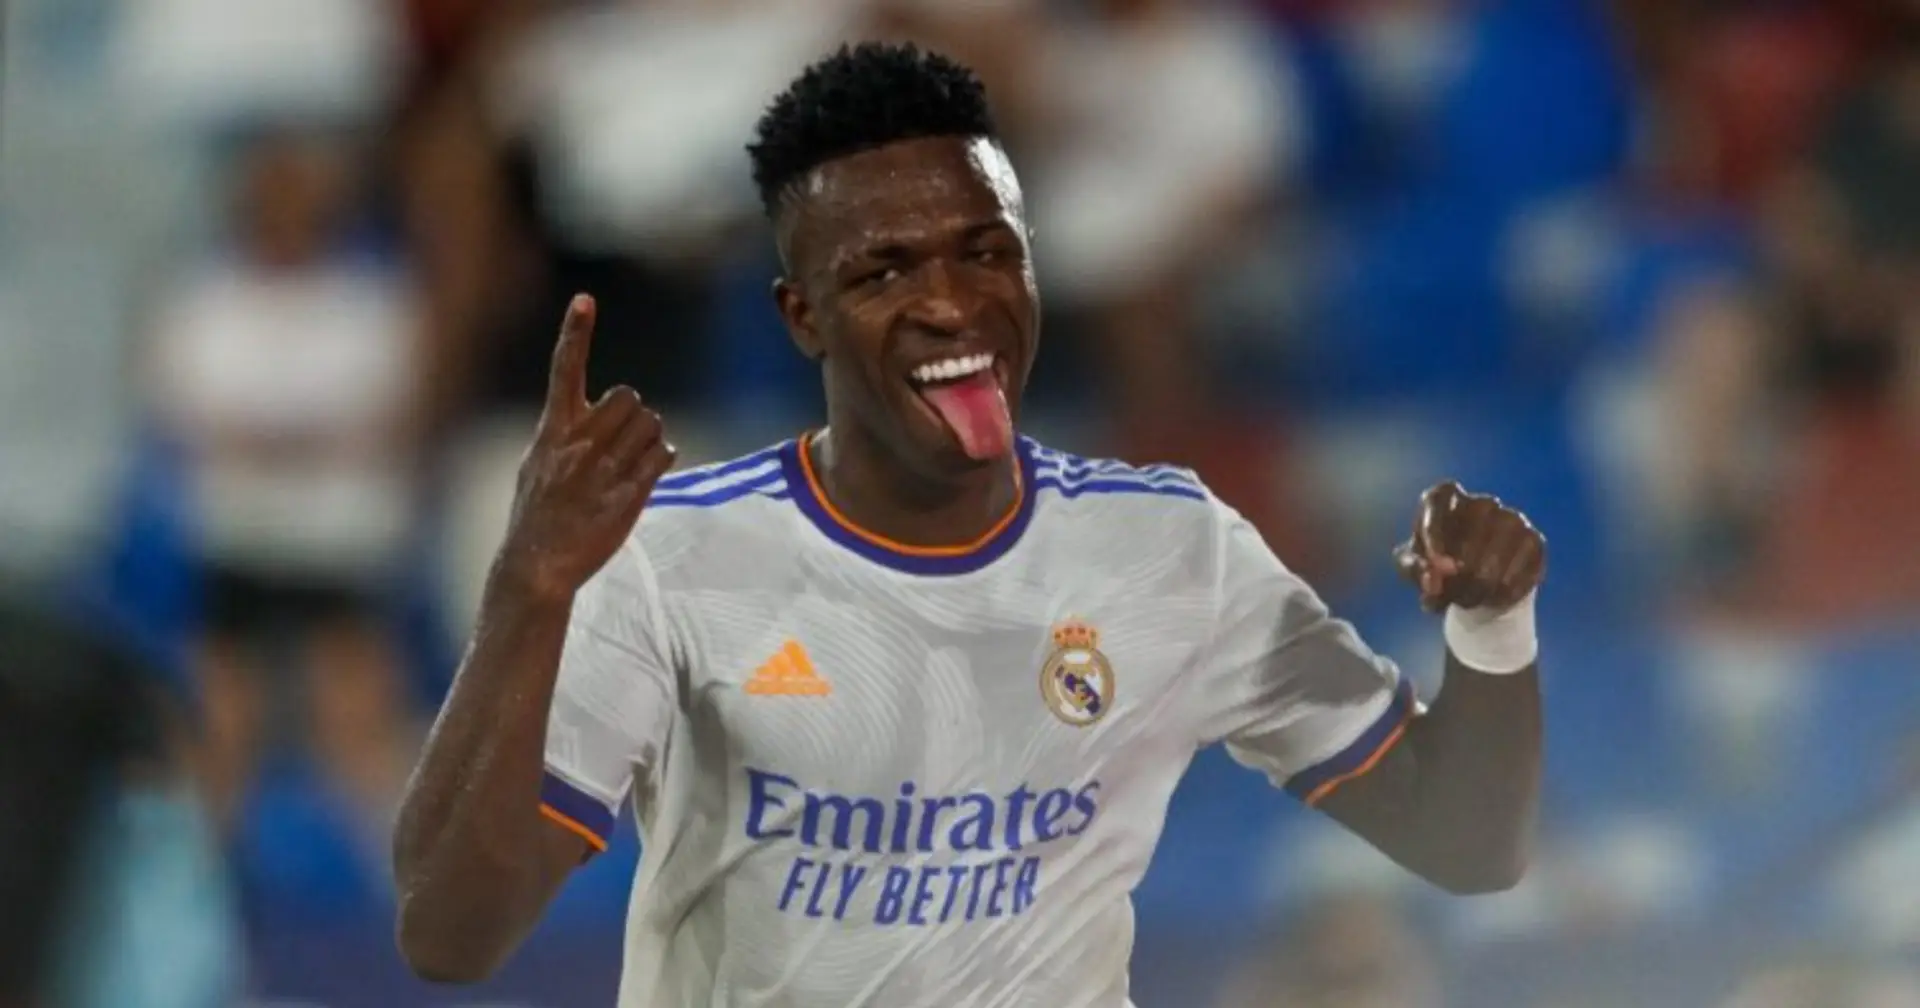 Revealed: How much PSG could offer Vinicius Jr in wages to 'complicate' Real Madrid deal renewal